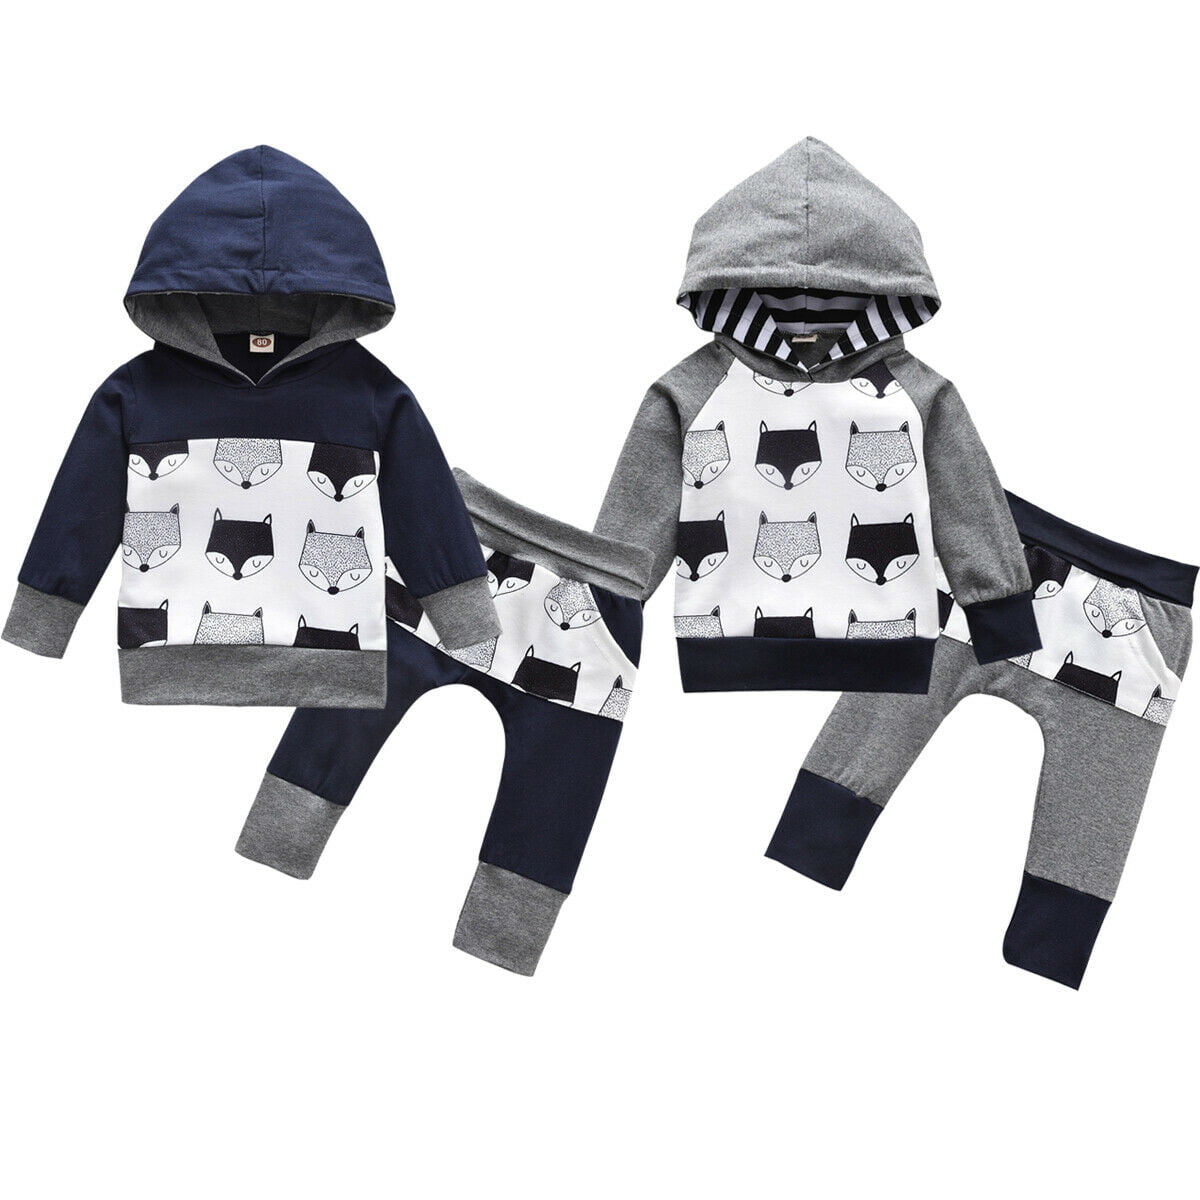 Unisex Toddler Kids Boy Girls Fox Hoodie T-Shirt Top Sweatshirt Baby Hooded Outfit Outdoor Clothes Spring Autumn 1-6Y 